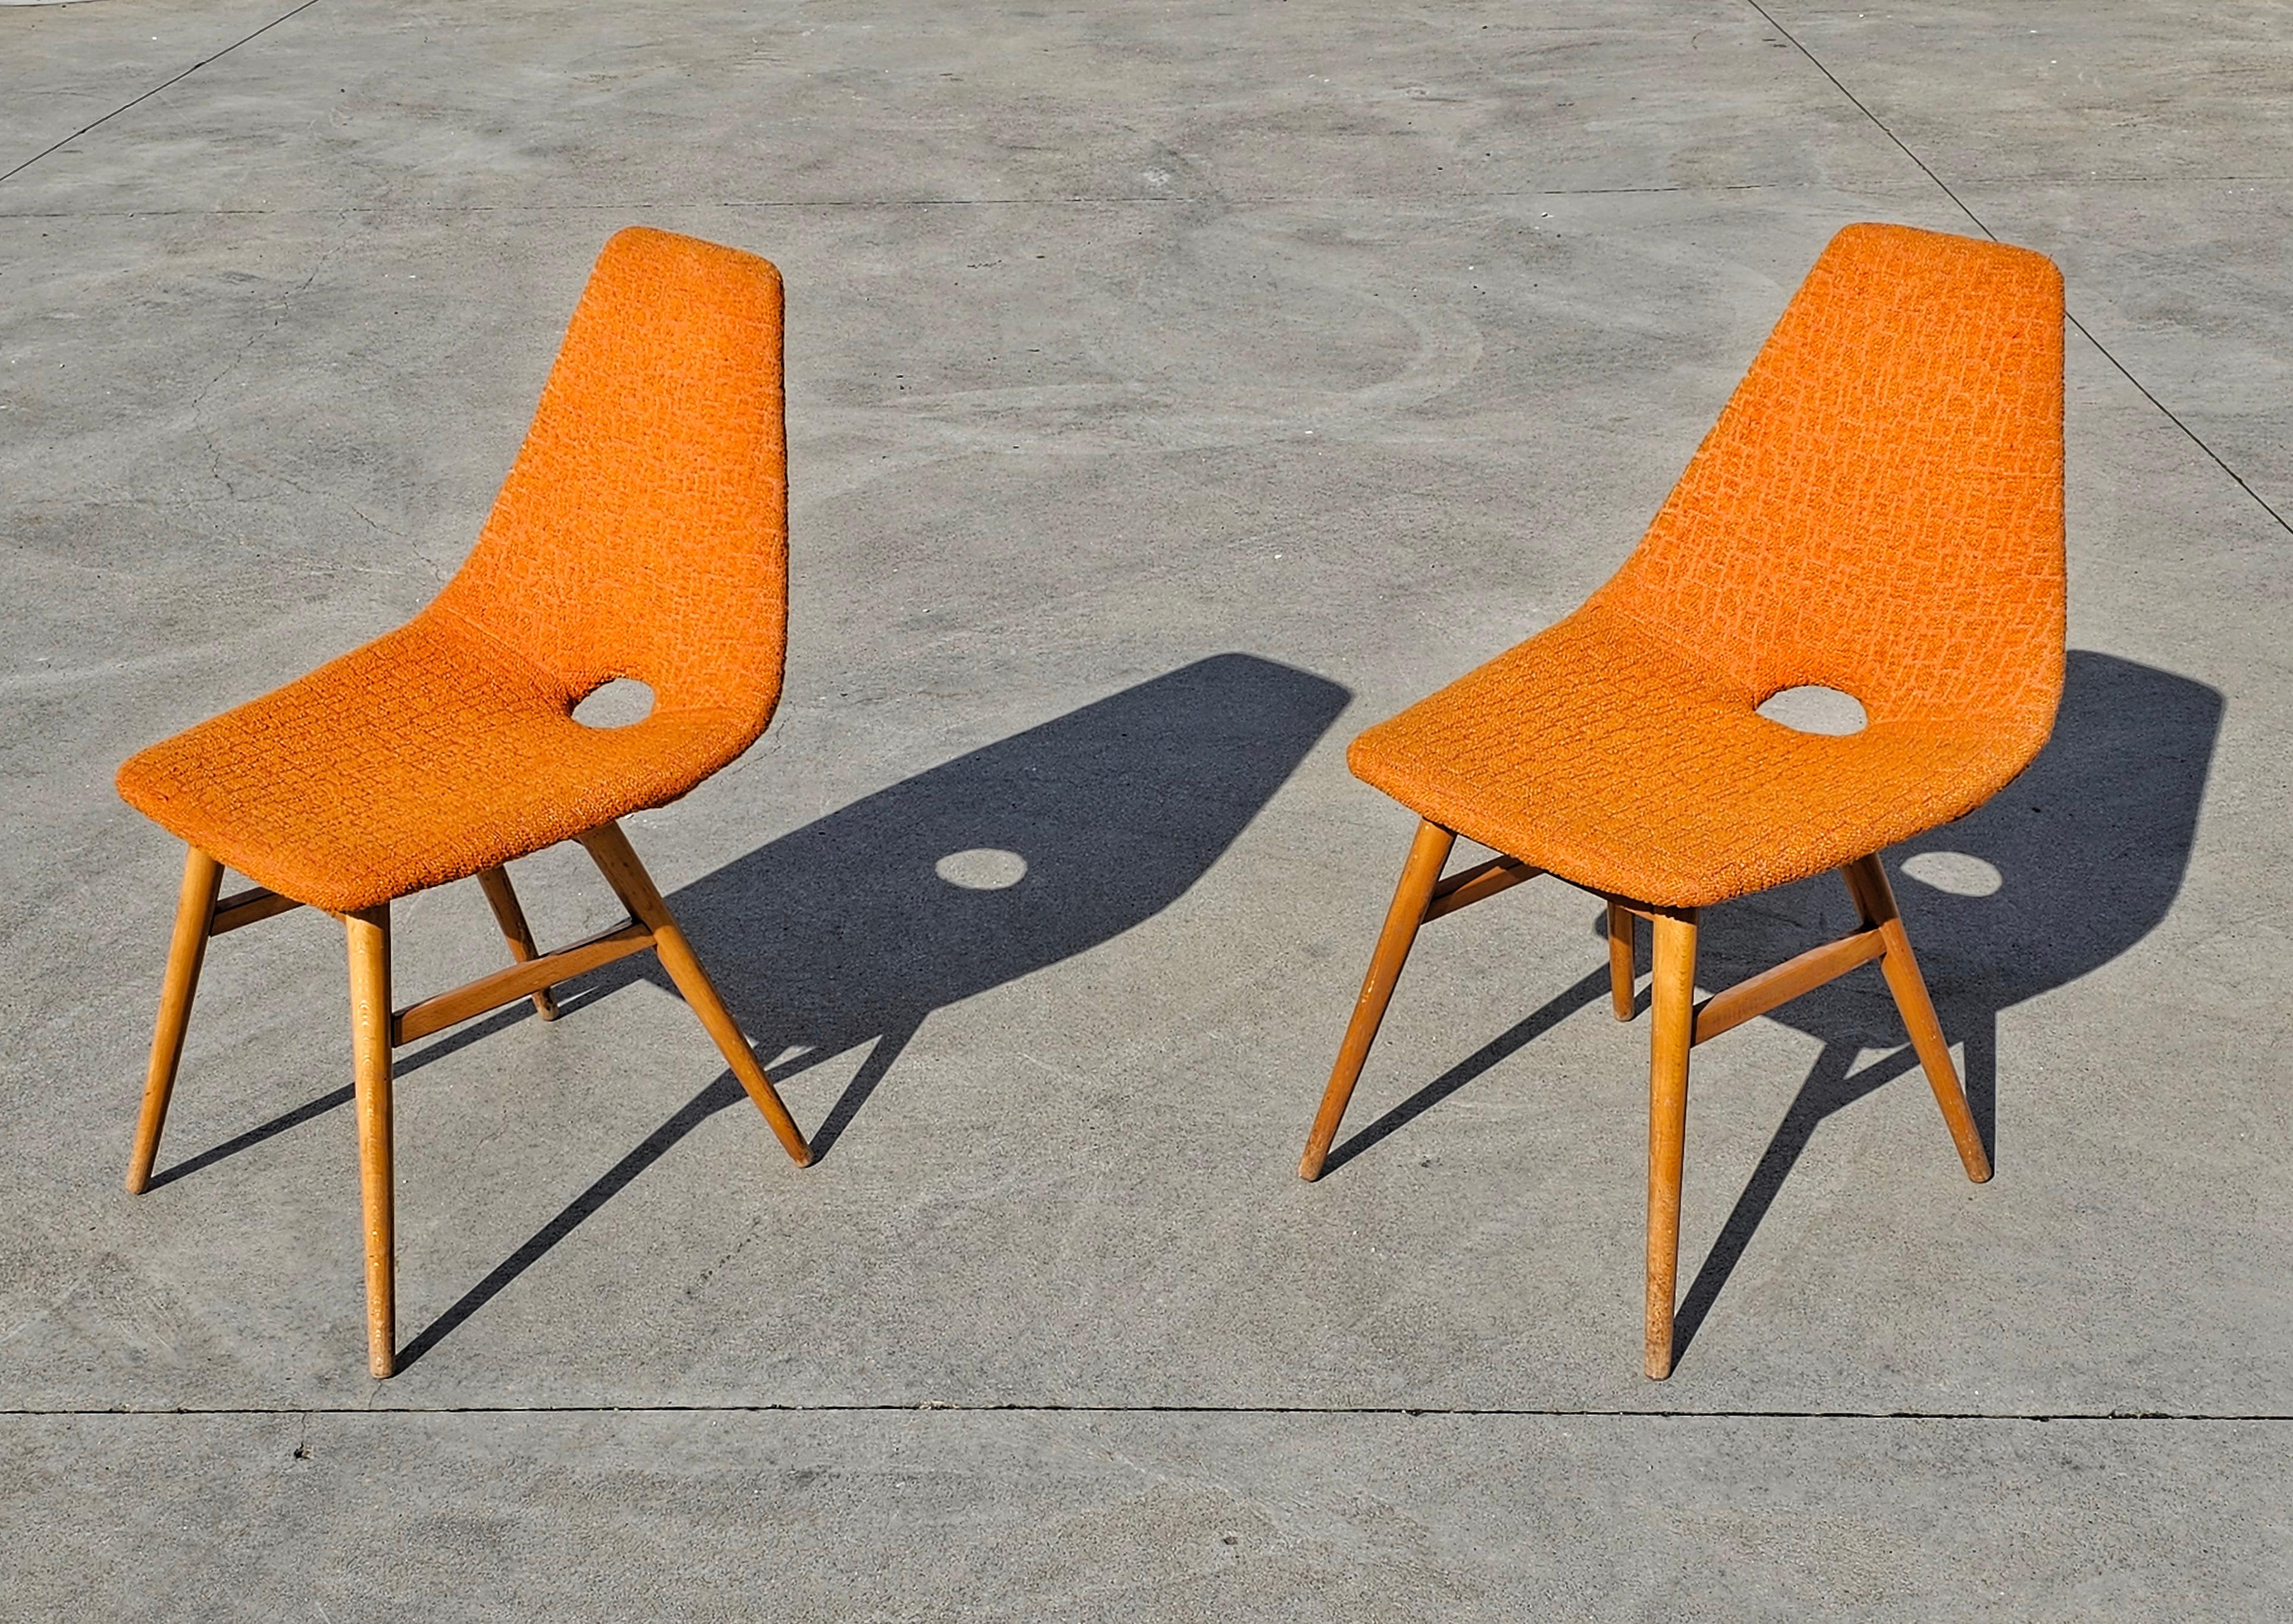 Mid-20th Century Pair of Mid-Century Modern Side Chairs by Judit Burian and Erika Szek, 1950s For Sale